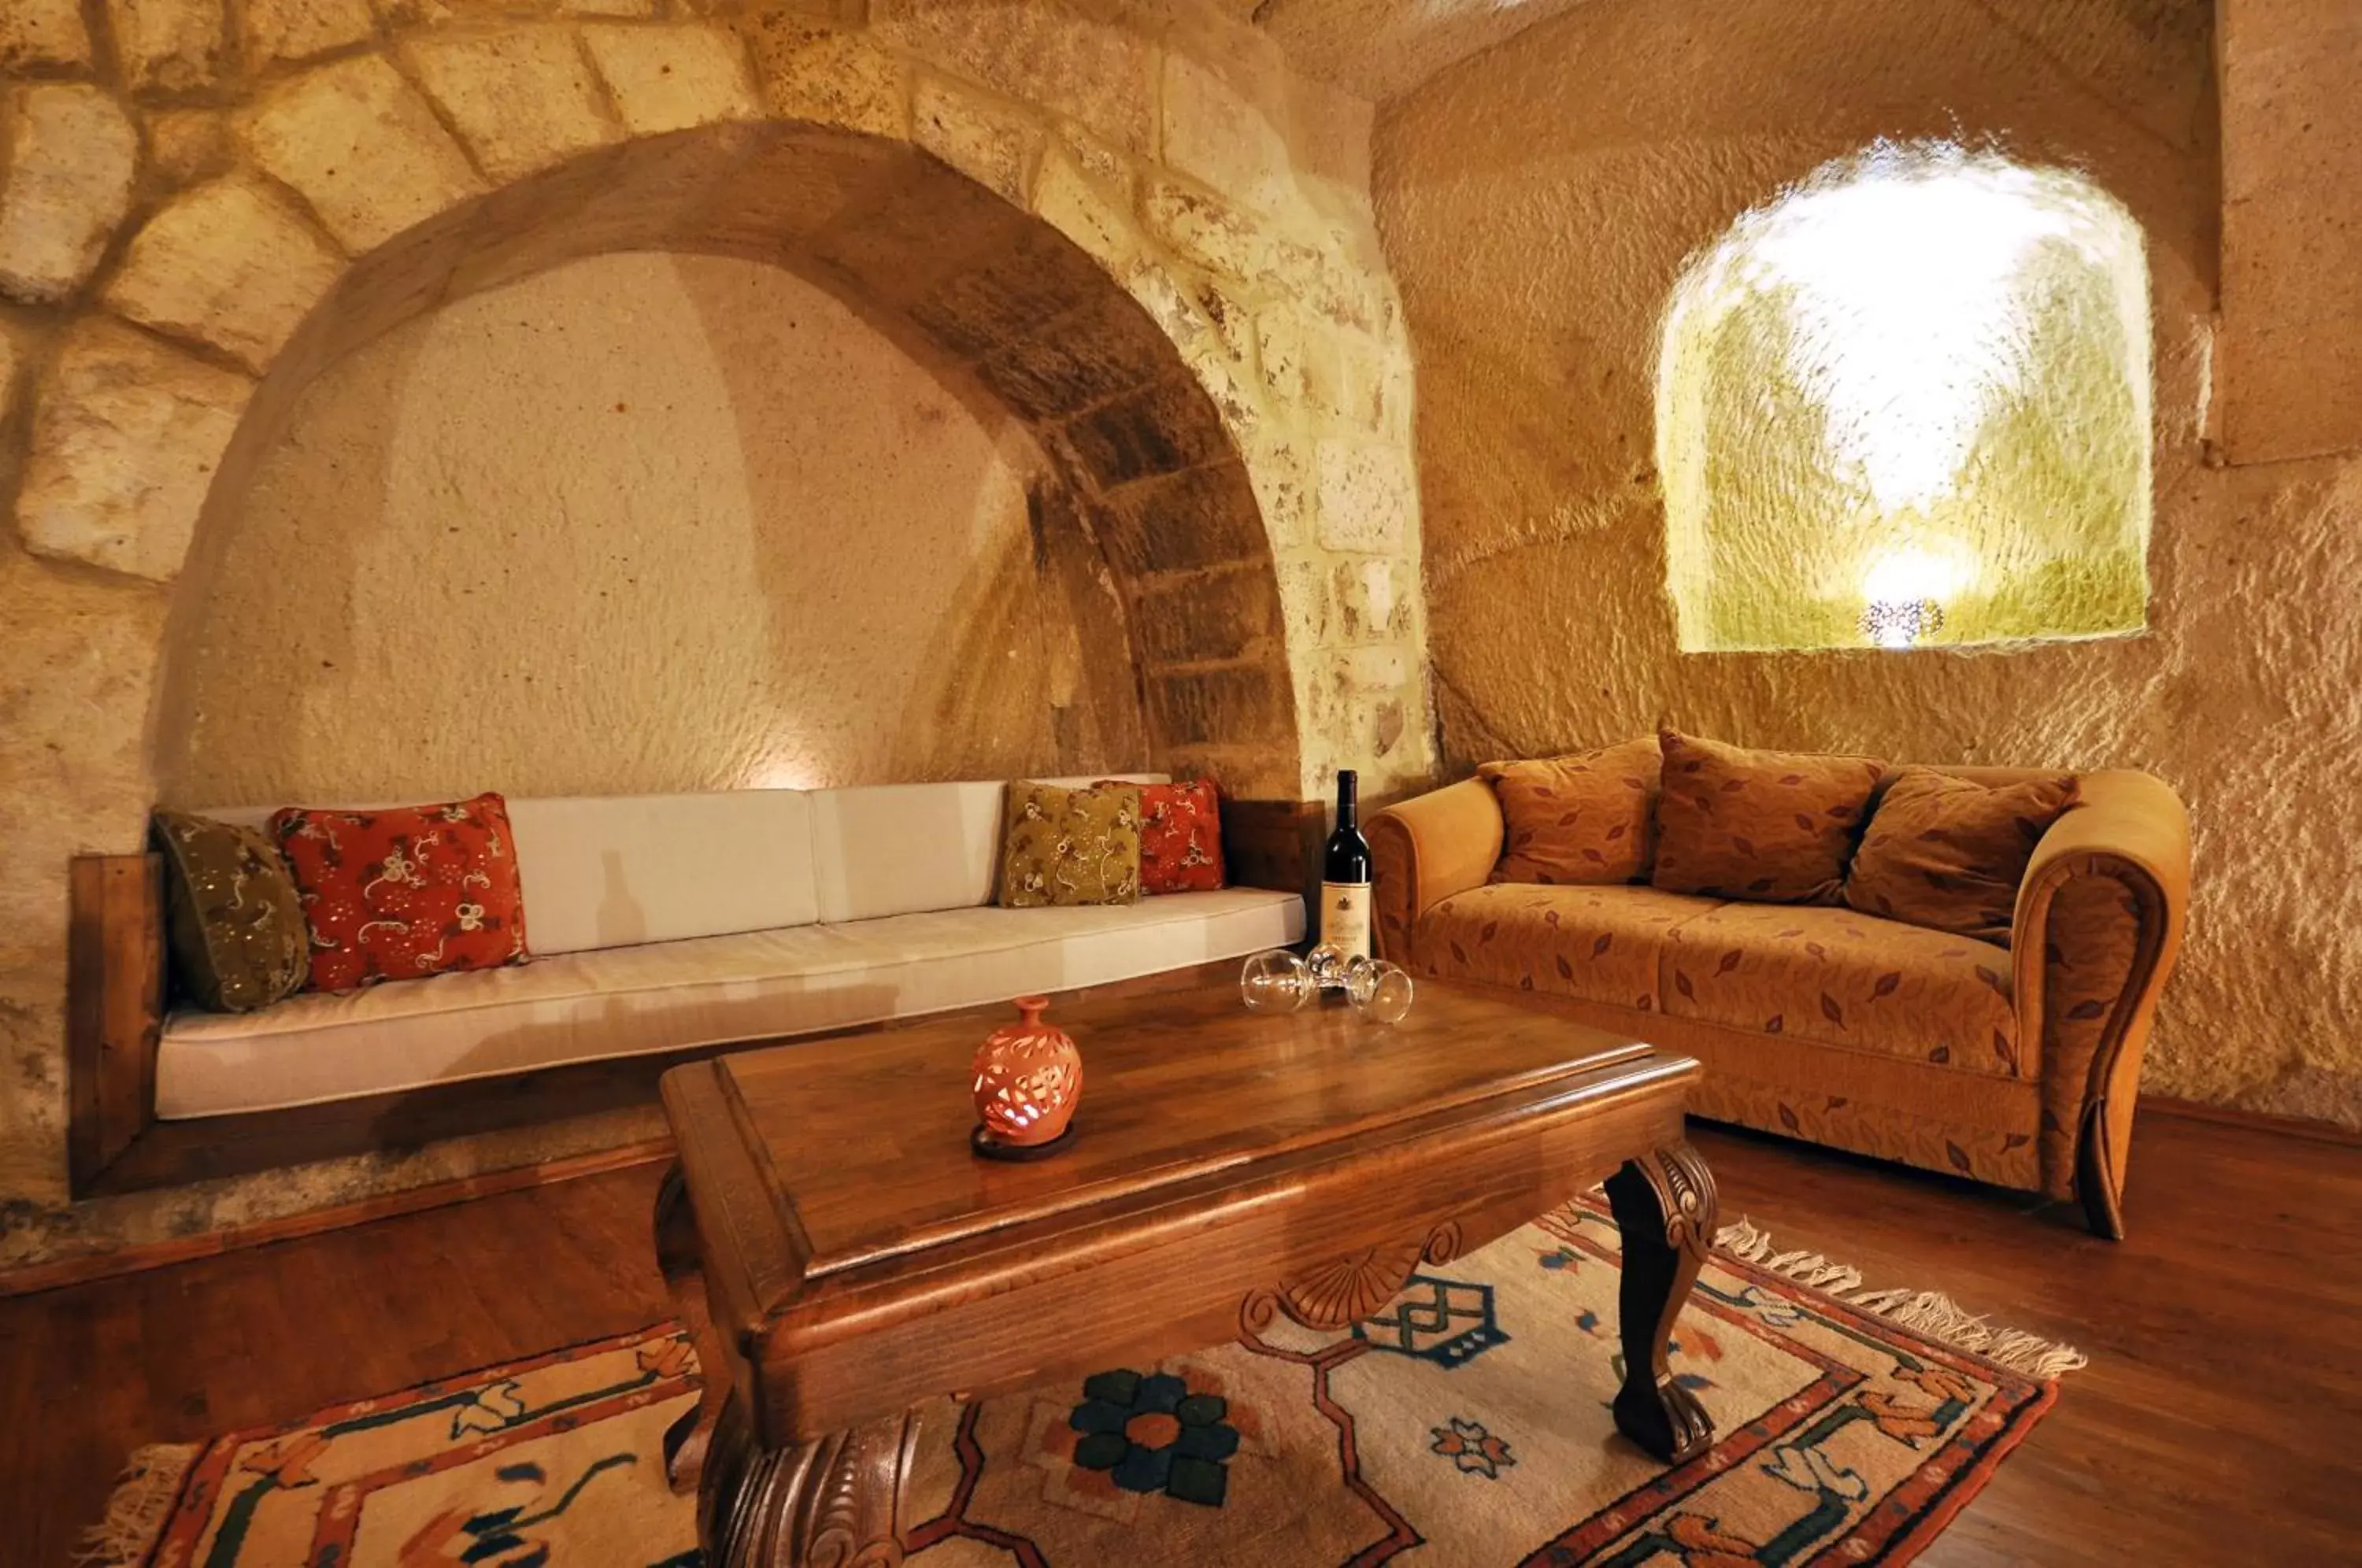 Photo of the whole room, Seating Area in Has Cave Konak